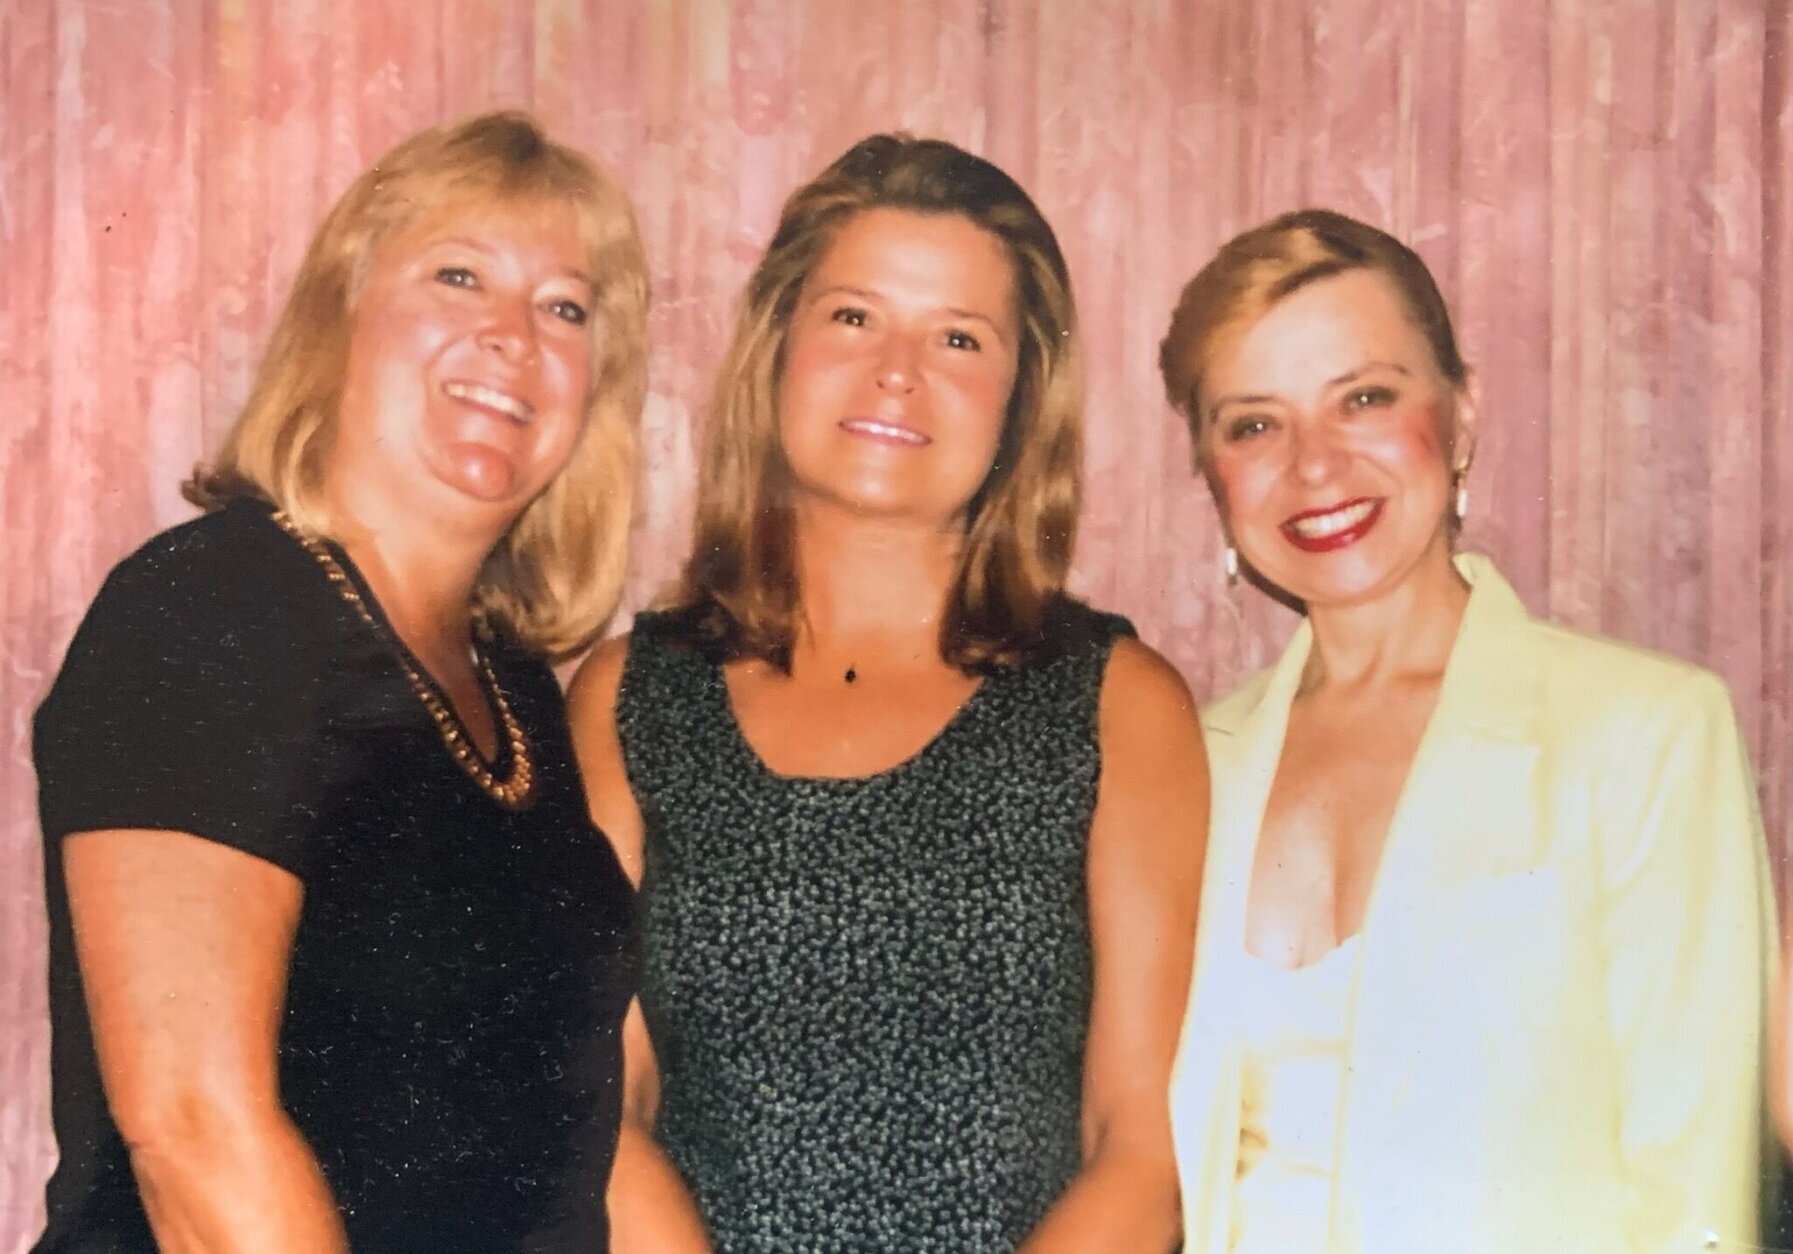 Gulley (center) and her sisters Connie (left) and Cathy (right). Gulley lost both siblings to cancer. Connie died of pancreatic cancer, and Cathy who had cervical cancer, passed away in September of 2022.